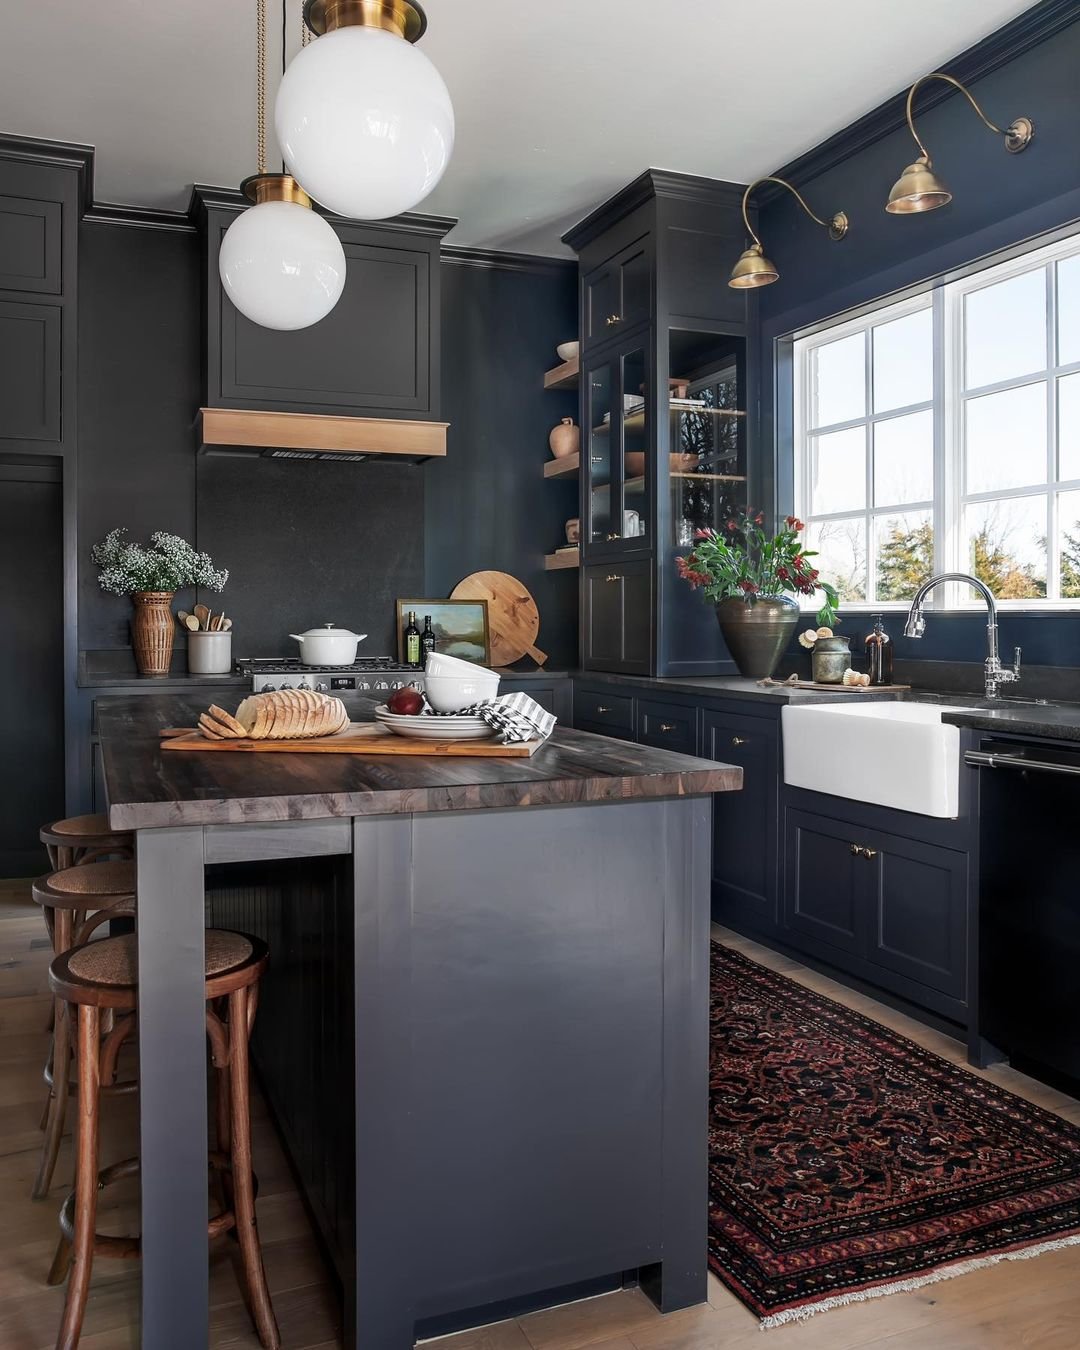 Black and Charcoal Wall Inspiration - Top Black Paint Colors ...